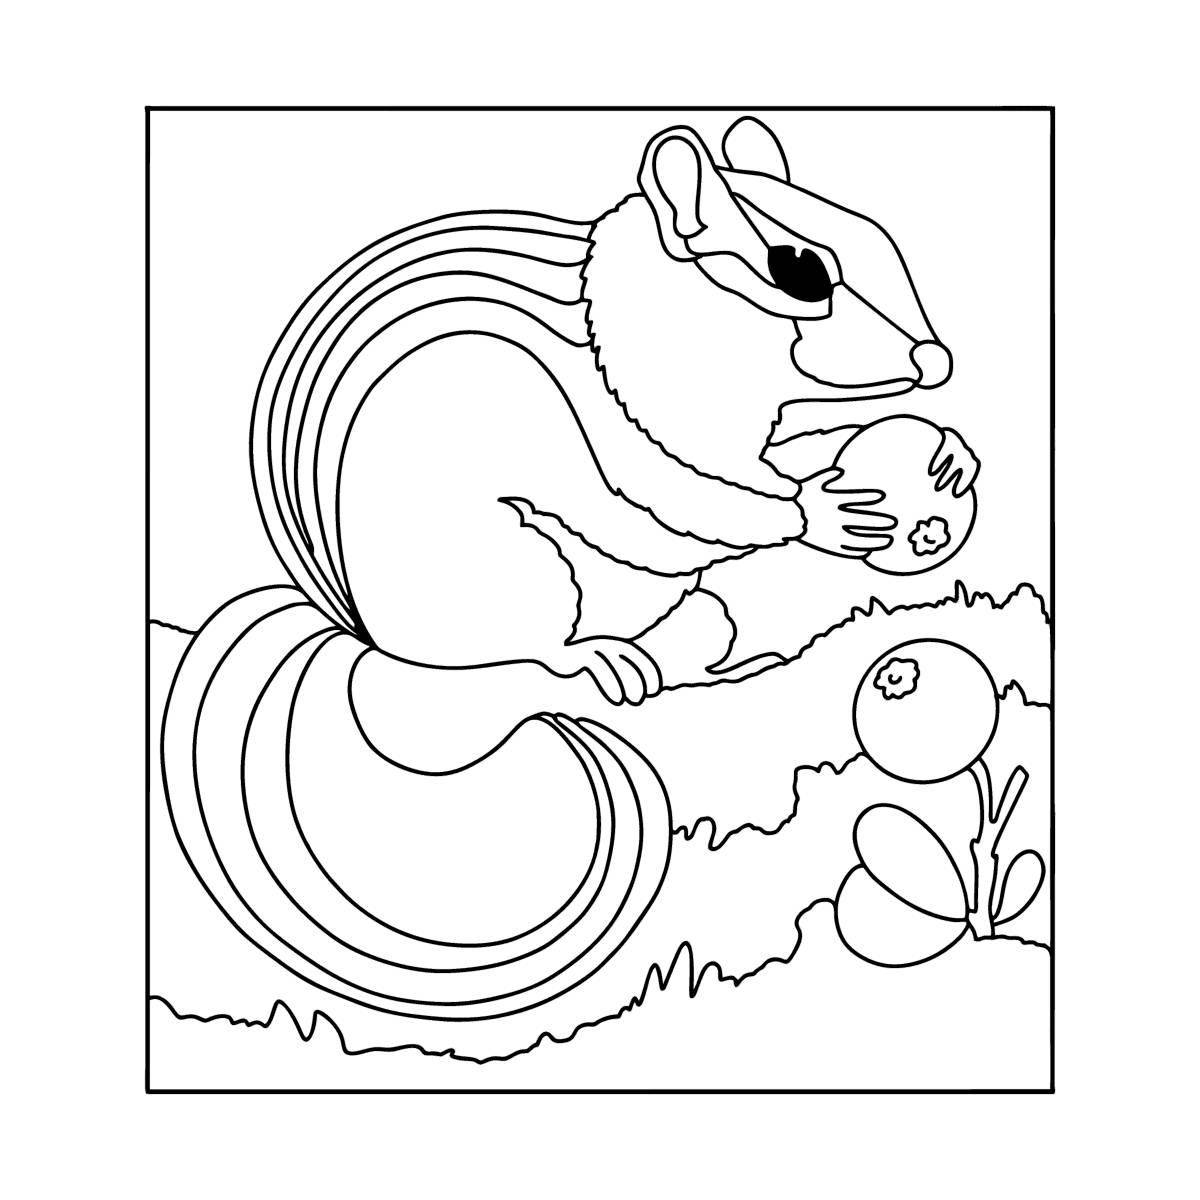 Colourful chipmunk coloring book for kids